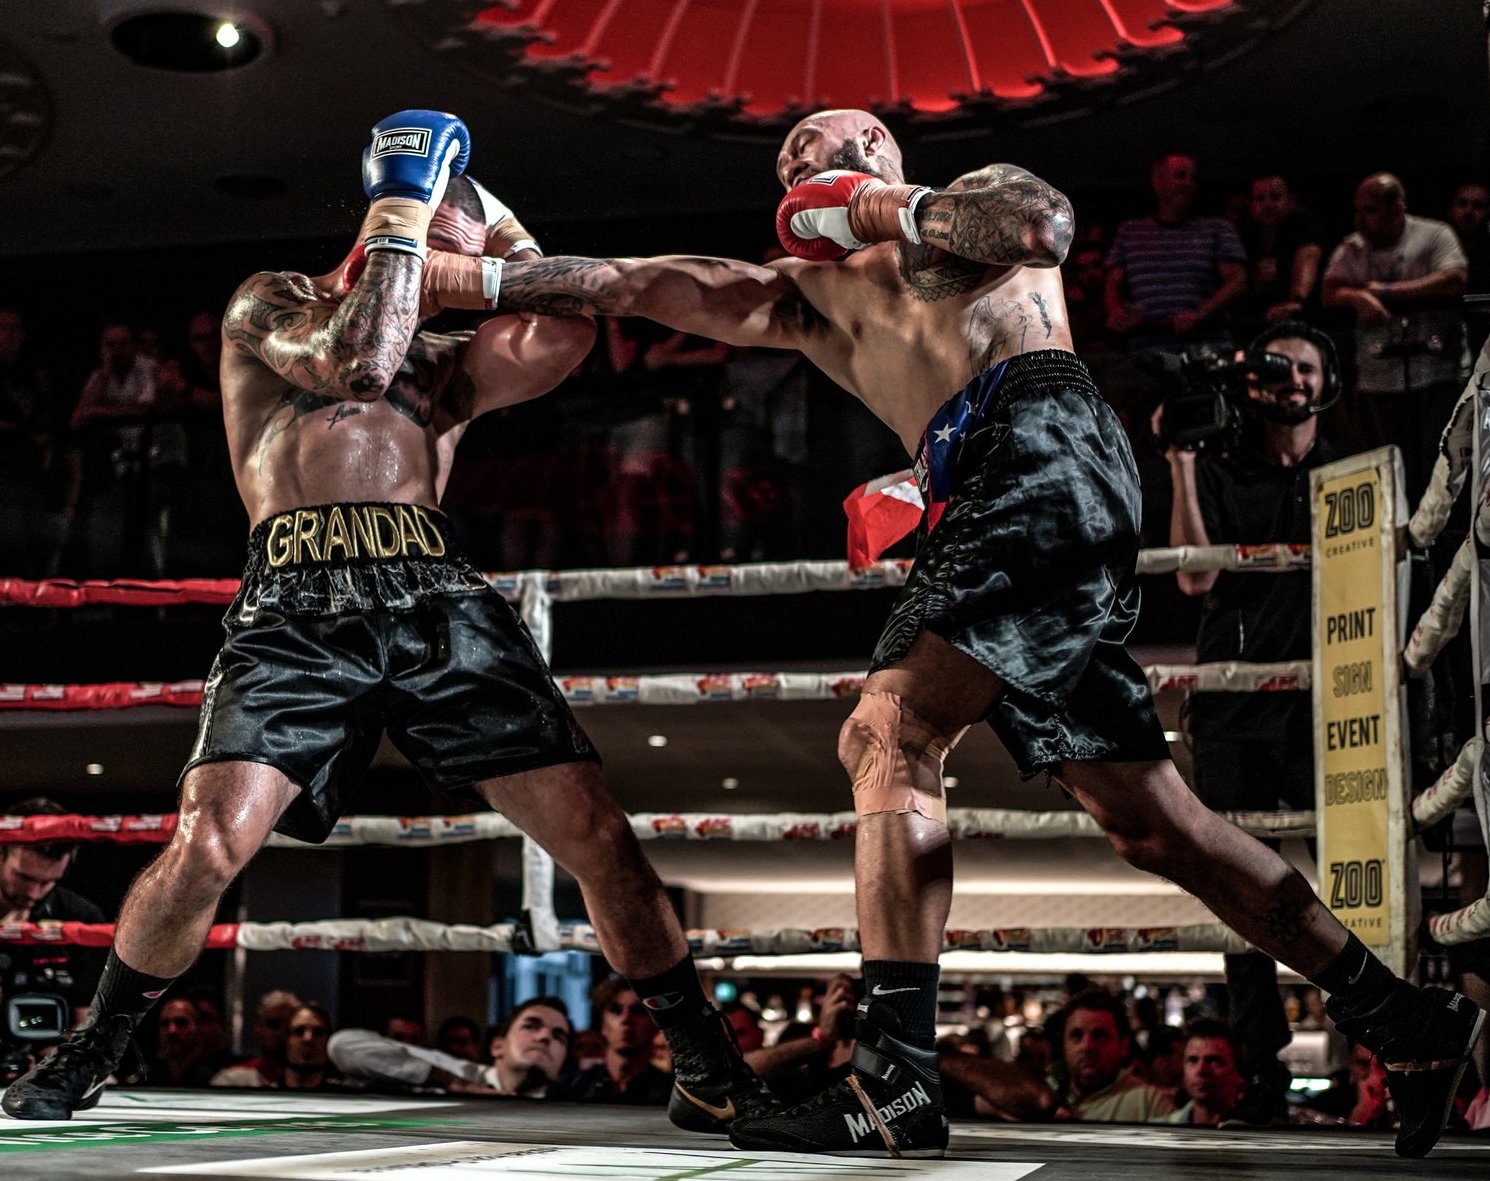 Australia’s Premier Boxing Series aims to win over new fans with fresh, no-frills approach